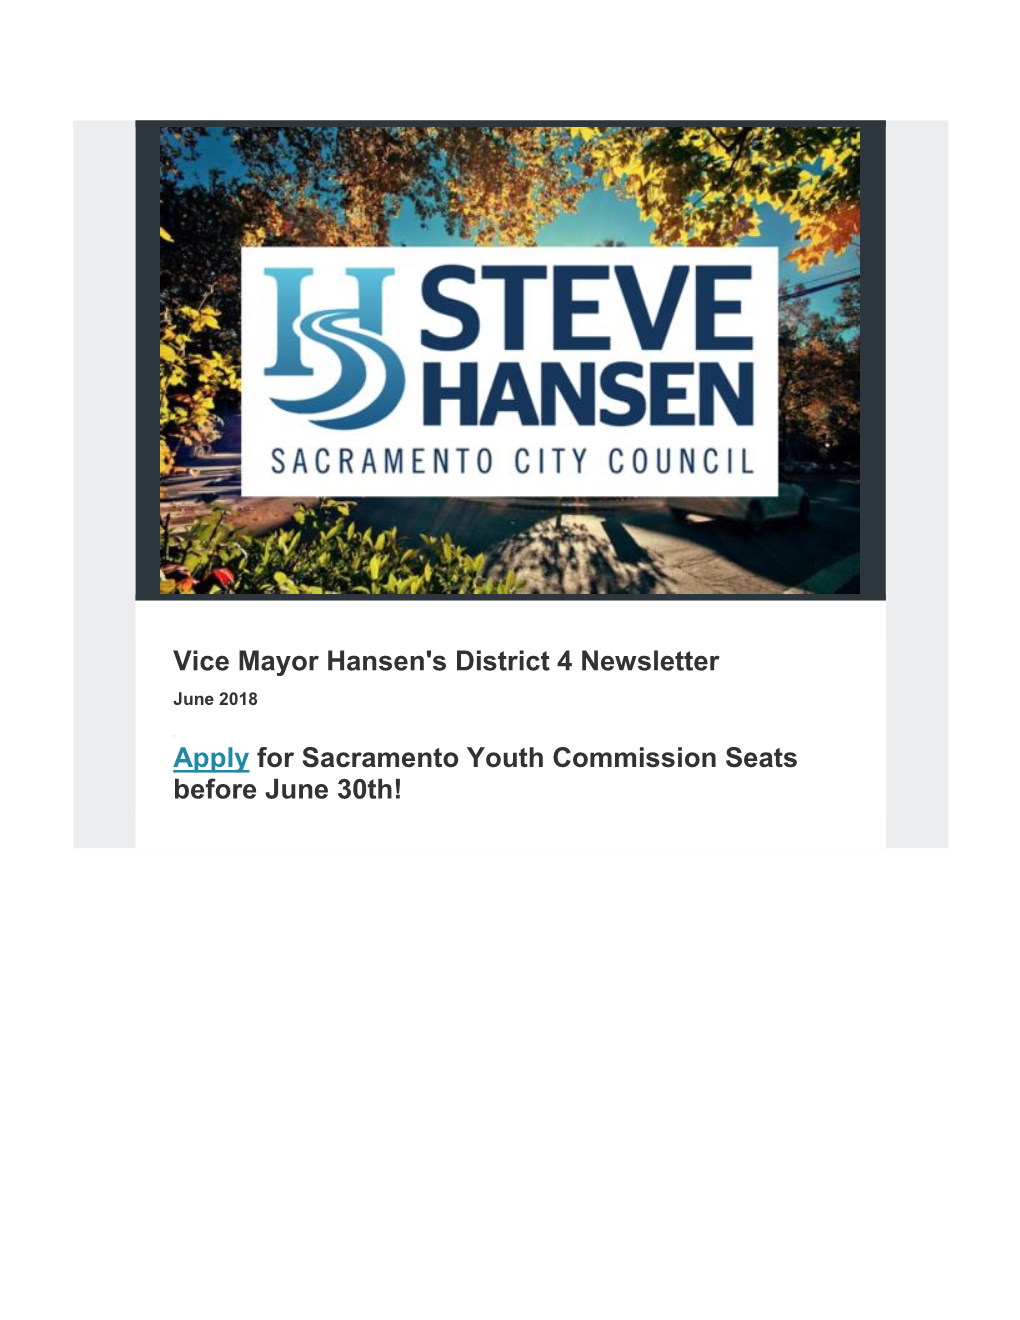 Vice Mayor Hansen's District 4 Newsletter Apply for Sacramento Youth Commission Seats Before June 30Th!